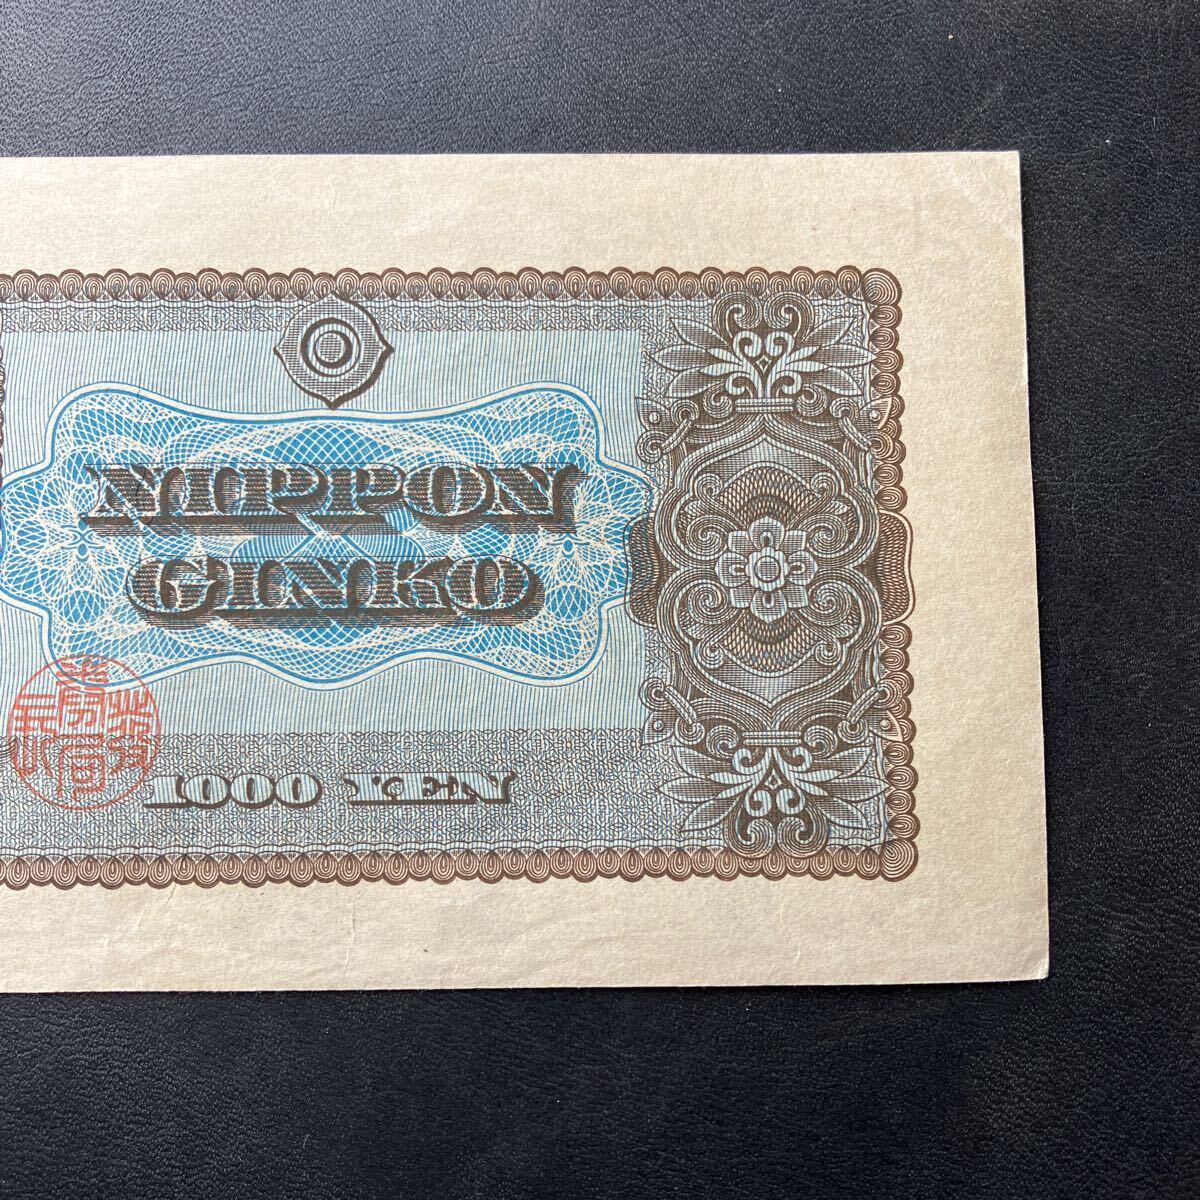  thousand jpy .. virtue futoshi . Japan Bank B number ticket old note 1,000 jpy . beautiful goods *26